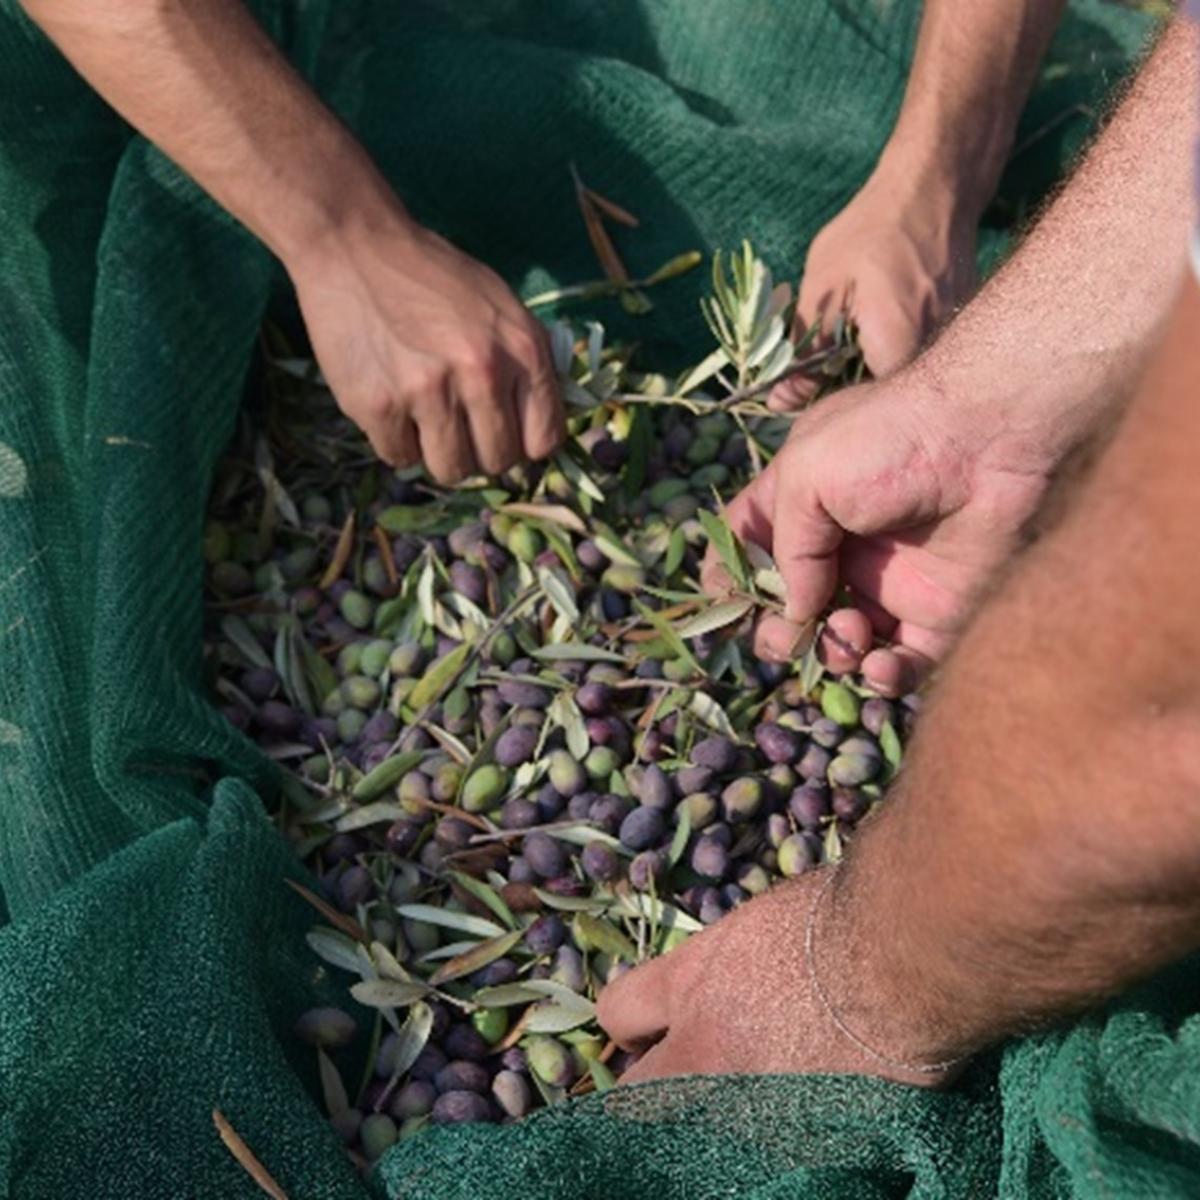 Olives are the main crop produced in the South, harvesting accounts for 40% of the total cost of olive production. 